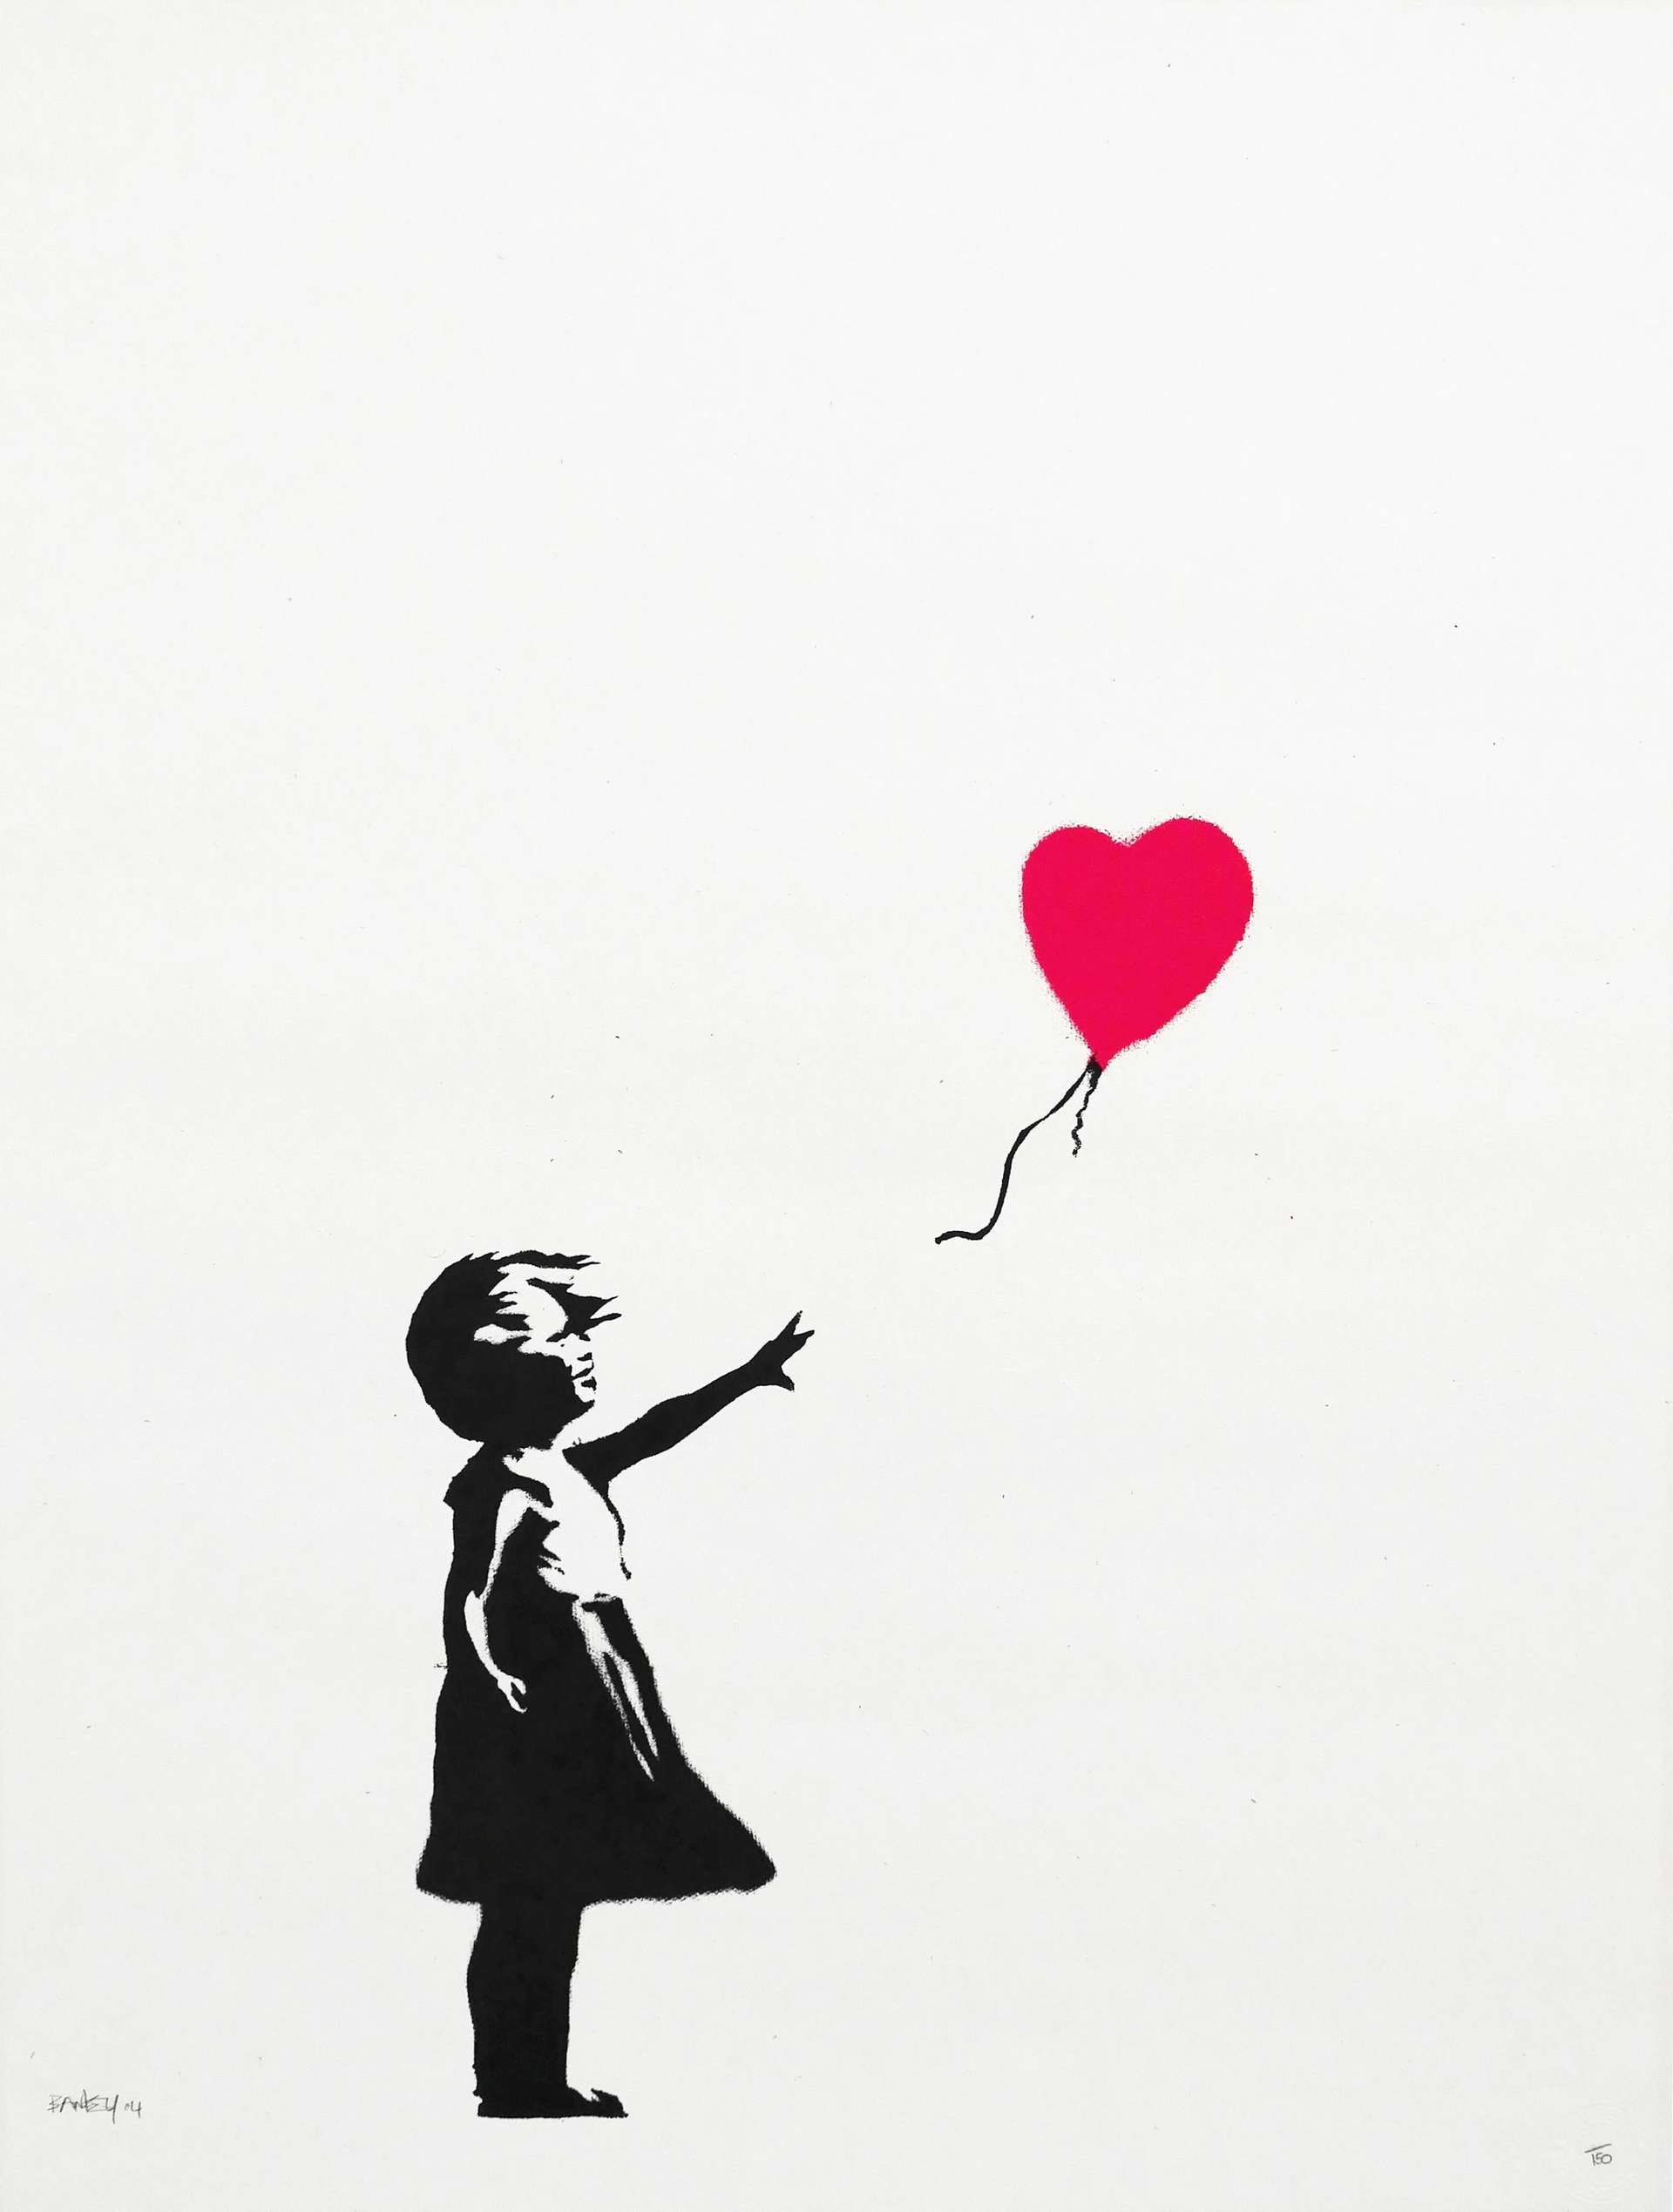 A screenprint by Banksy depicting a girl reaching for a red heart-shaped balloon in Banksy's graffiti stencil style.